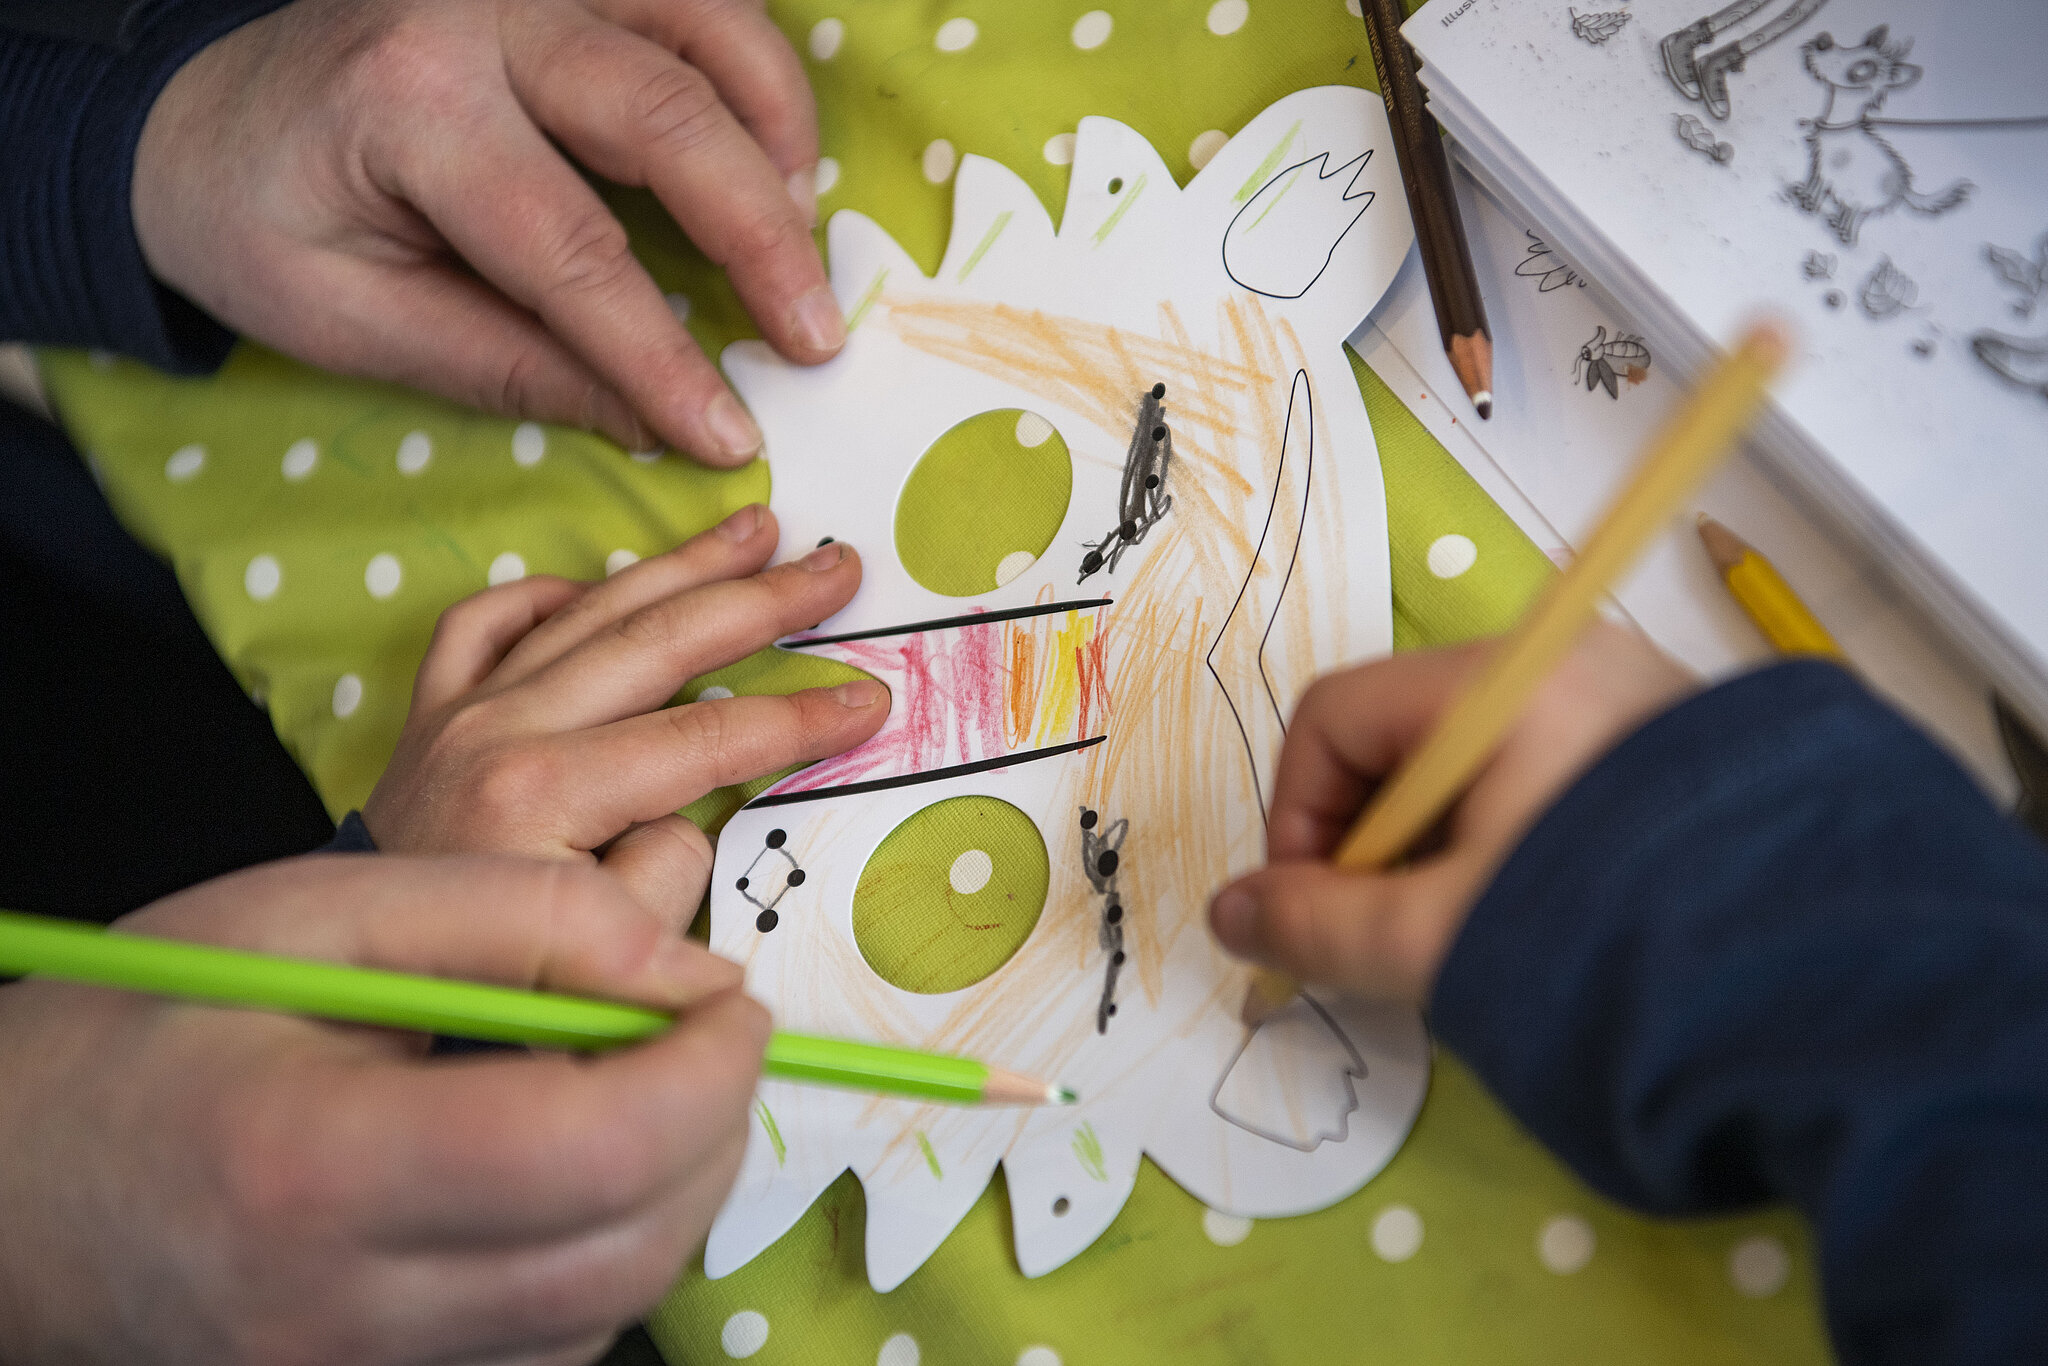 A child paints a mask during childcare